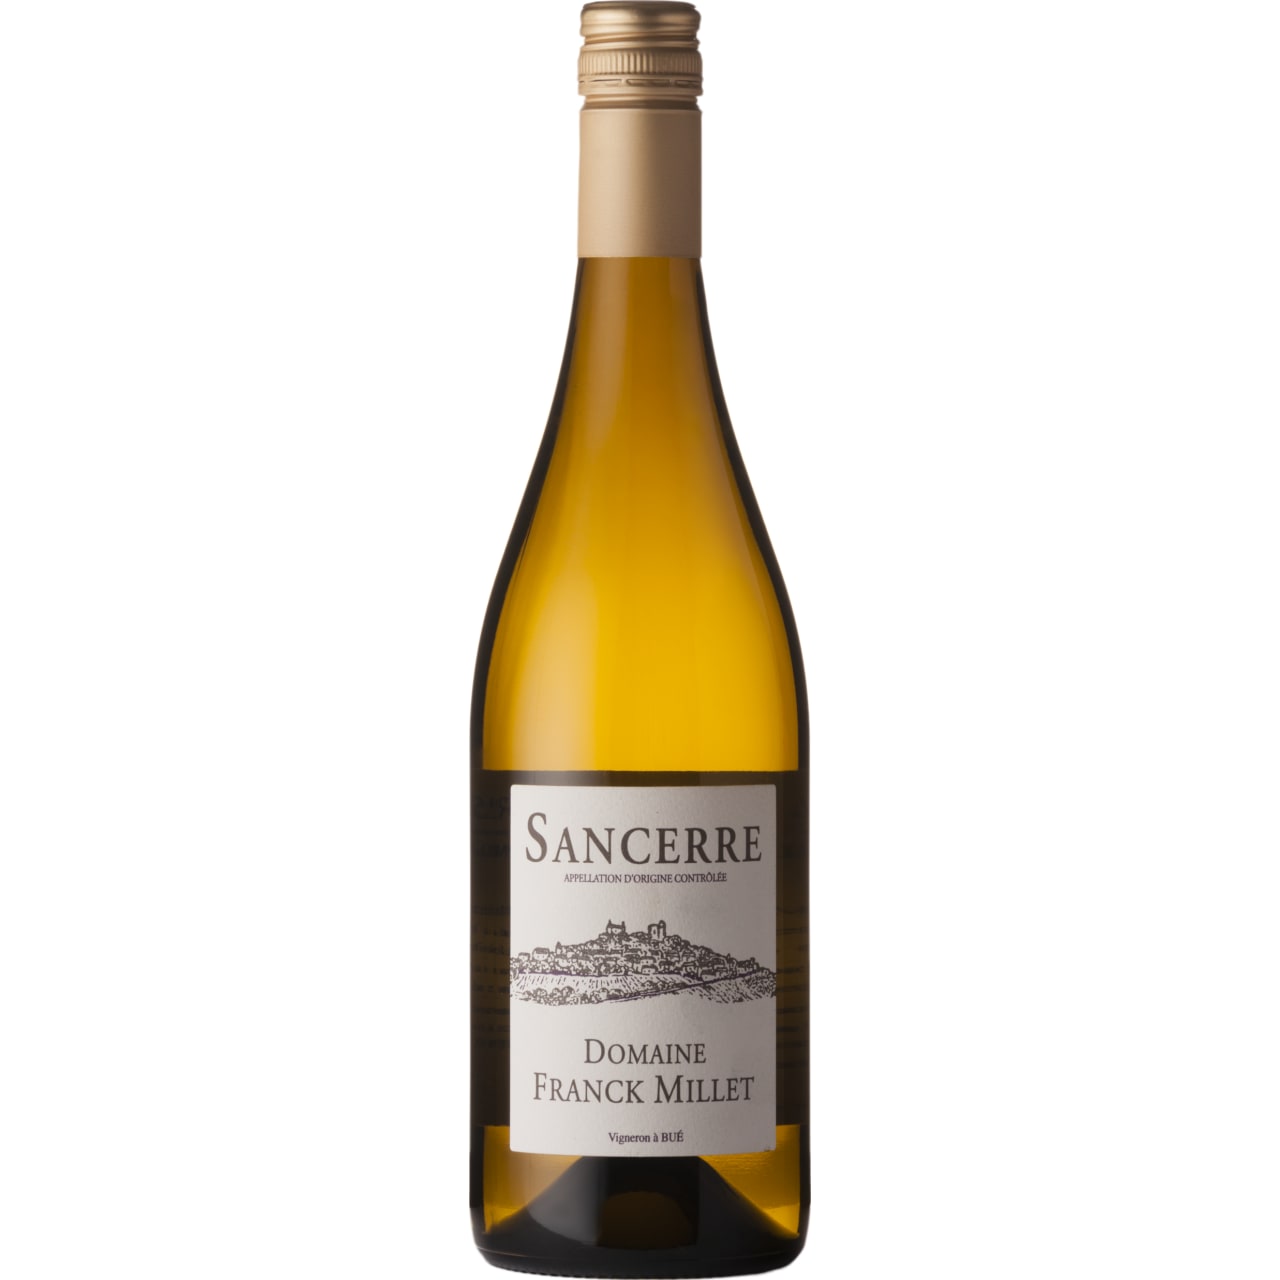 Leafy and aromatic, this is a classic herbaceous and lemony Sauvignon Blanc from Sancerre.